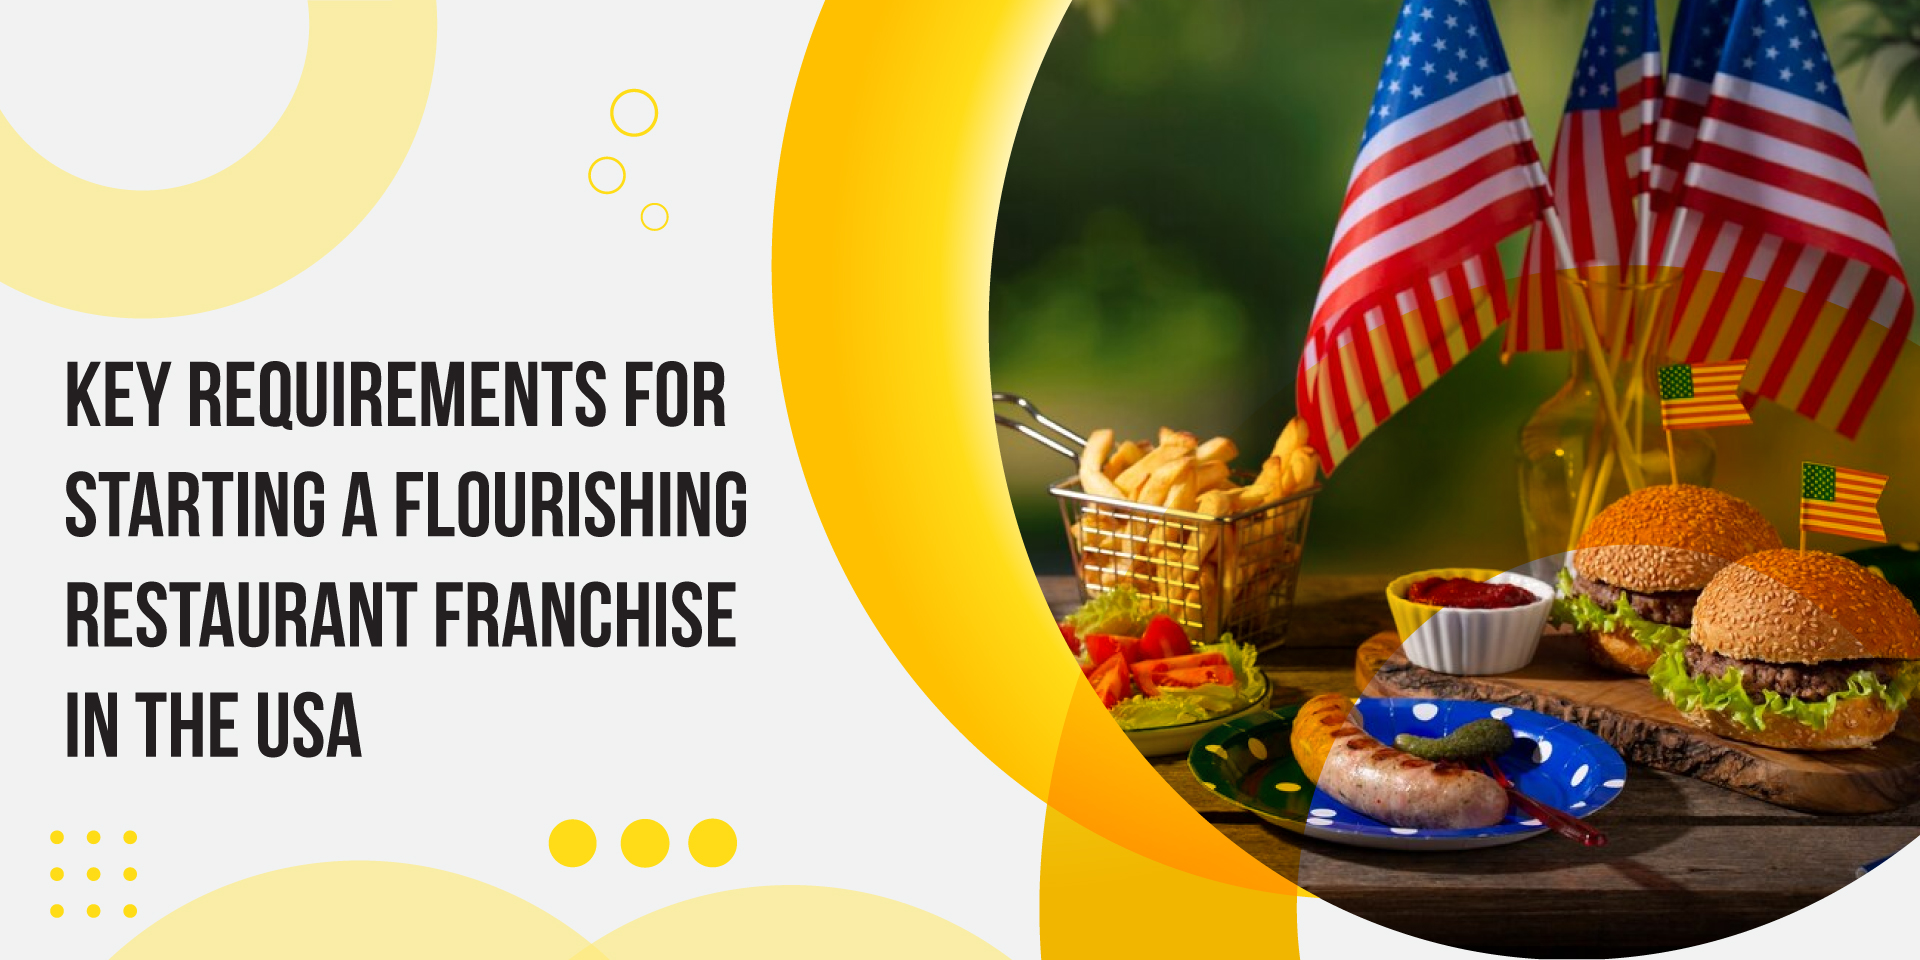 Key Requirements for Starting a Flourishing Restaurant Franchise in the USA